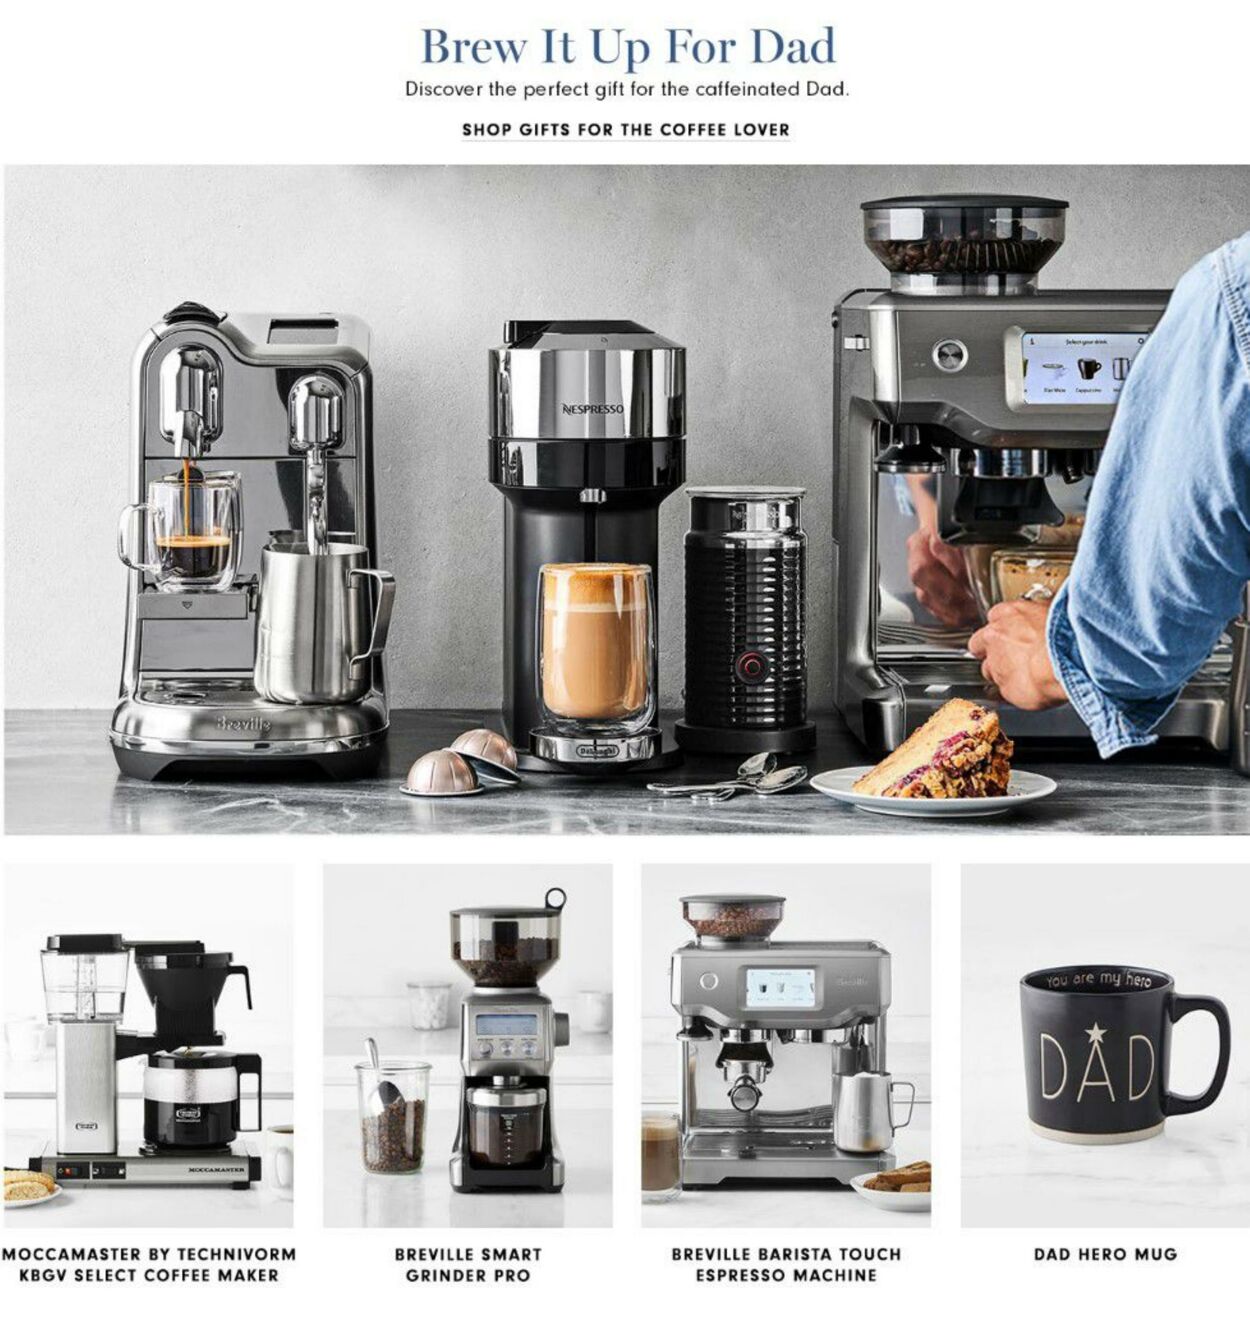 Weekly ad Williams Sonoma 05/17/2022 - 06/19/2022